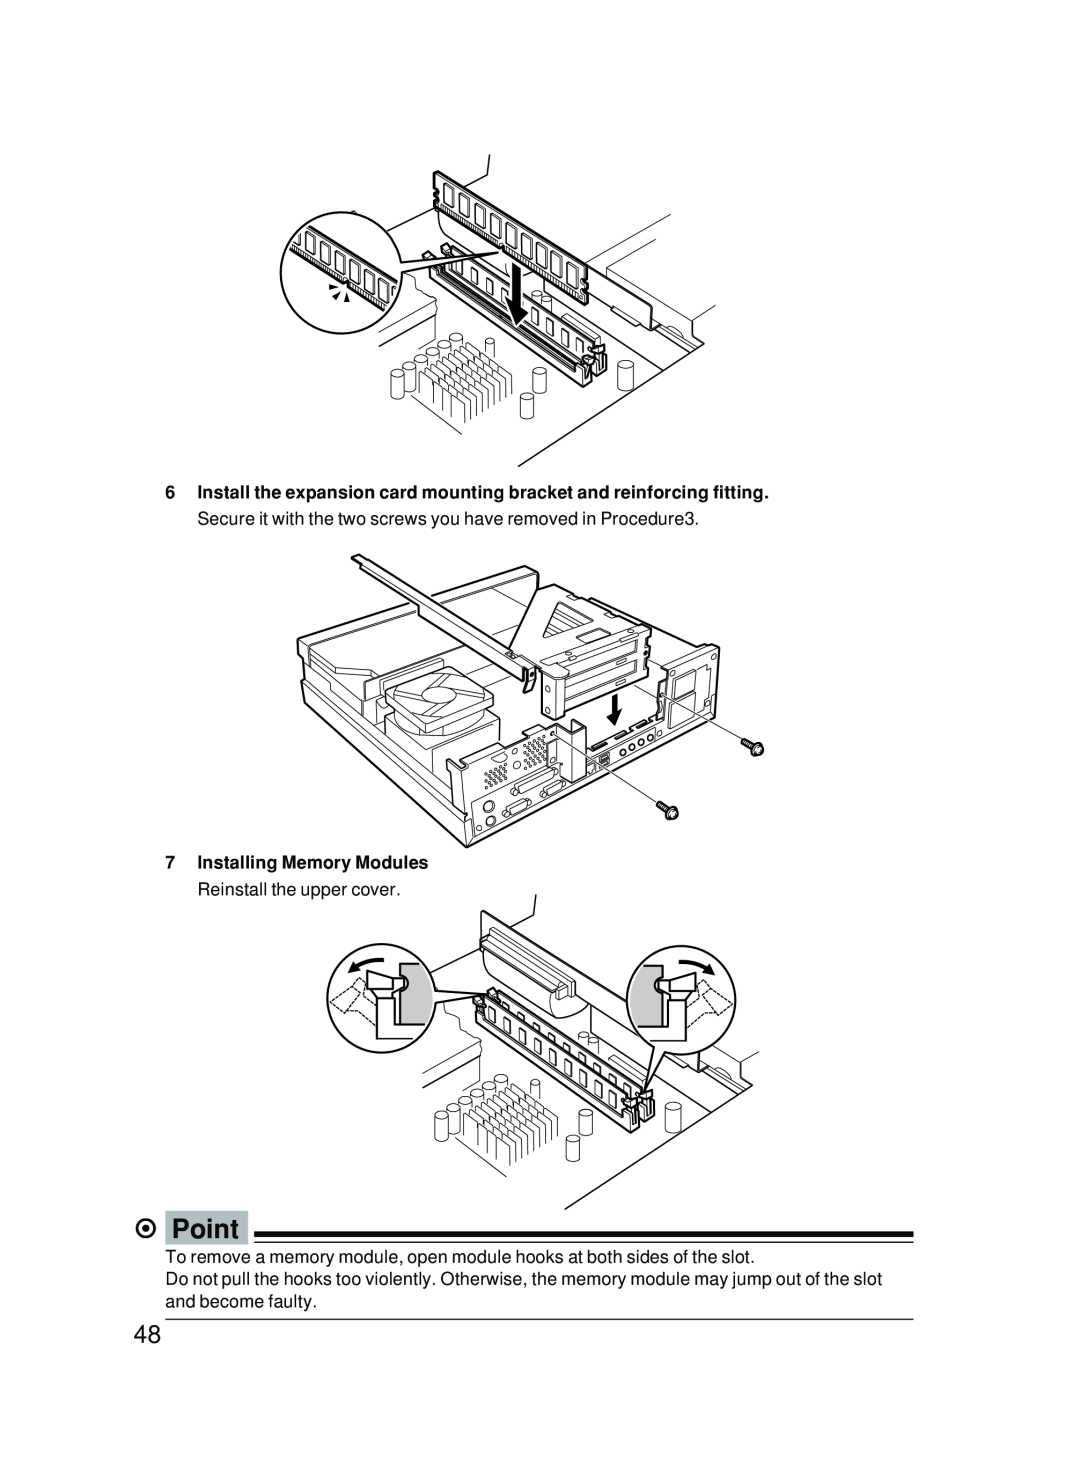 Fujitsu 5000 user manual Point, Installing Memory Modules Reinstall the upper cover 